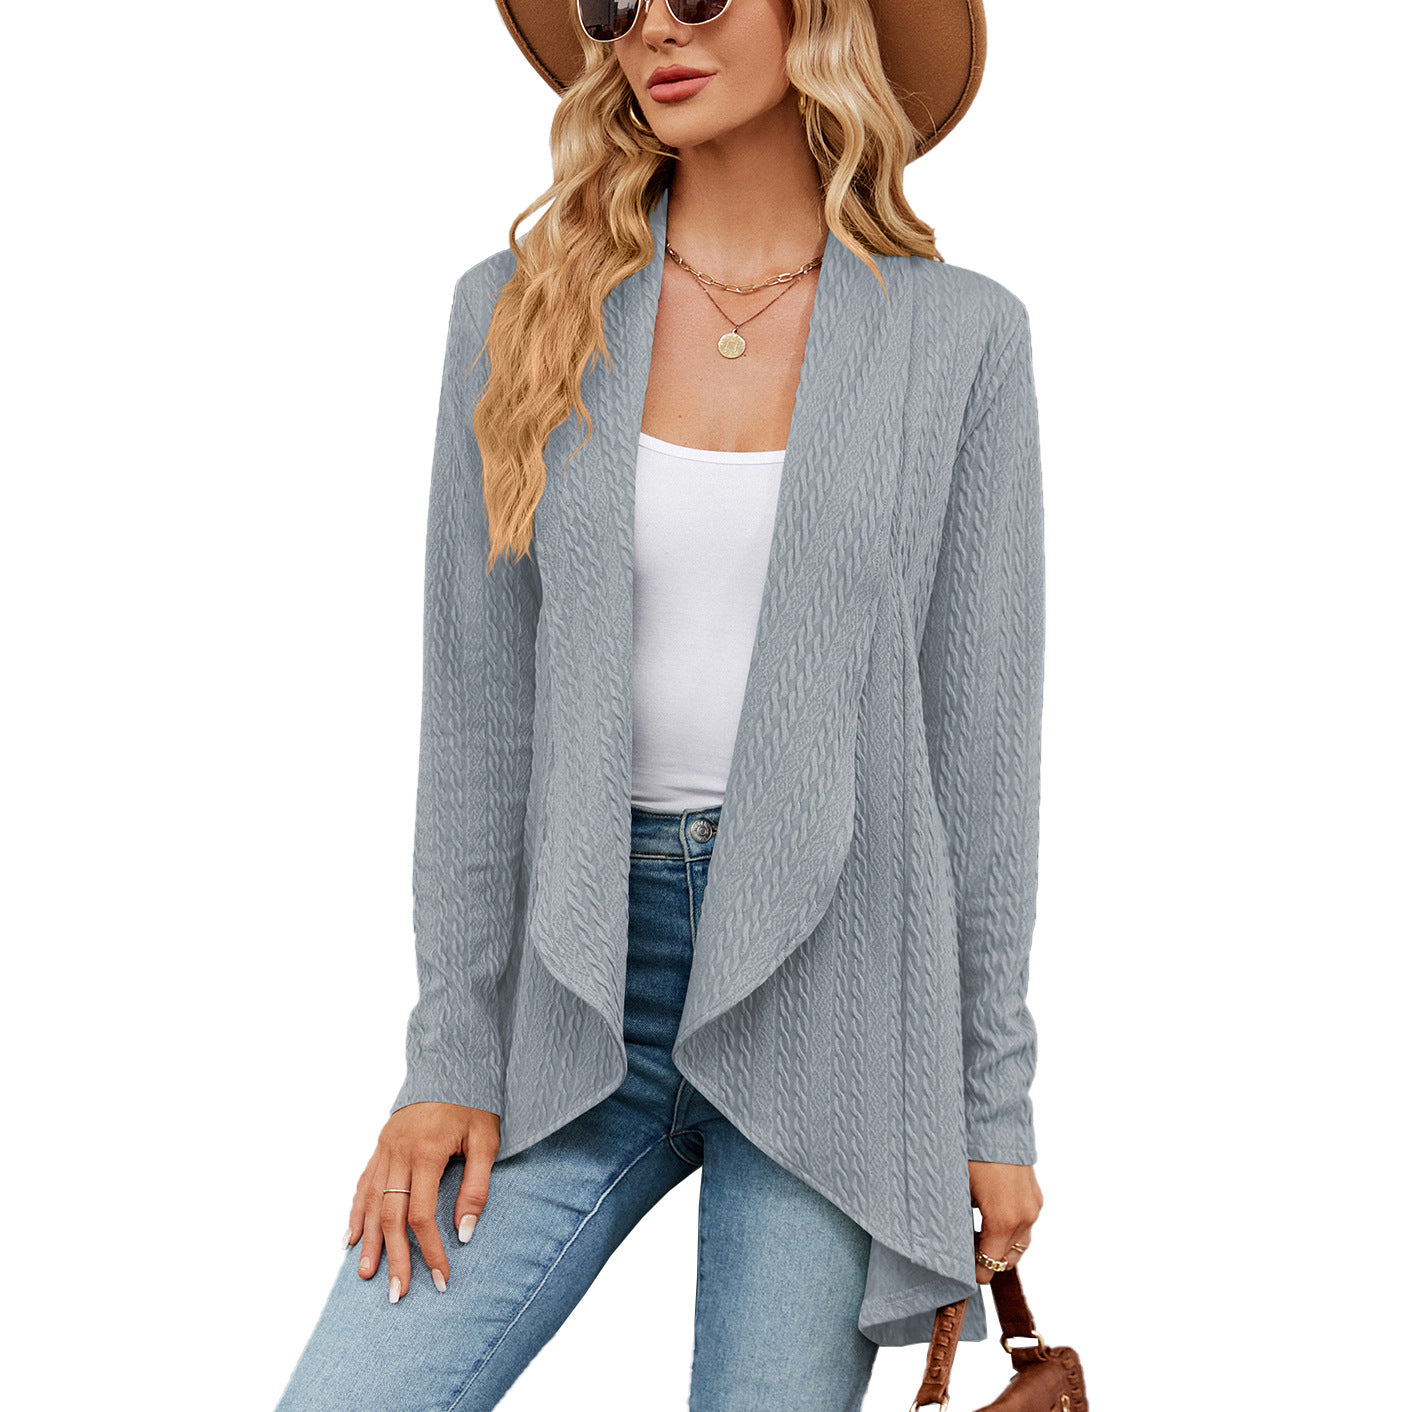 Women's Long Sleeve Sweater Solid Color Loose Cardigan Knitted Jacket